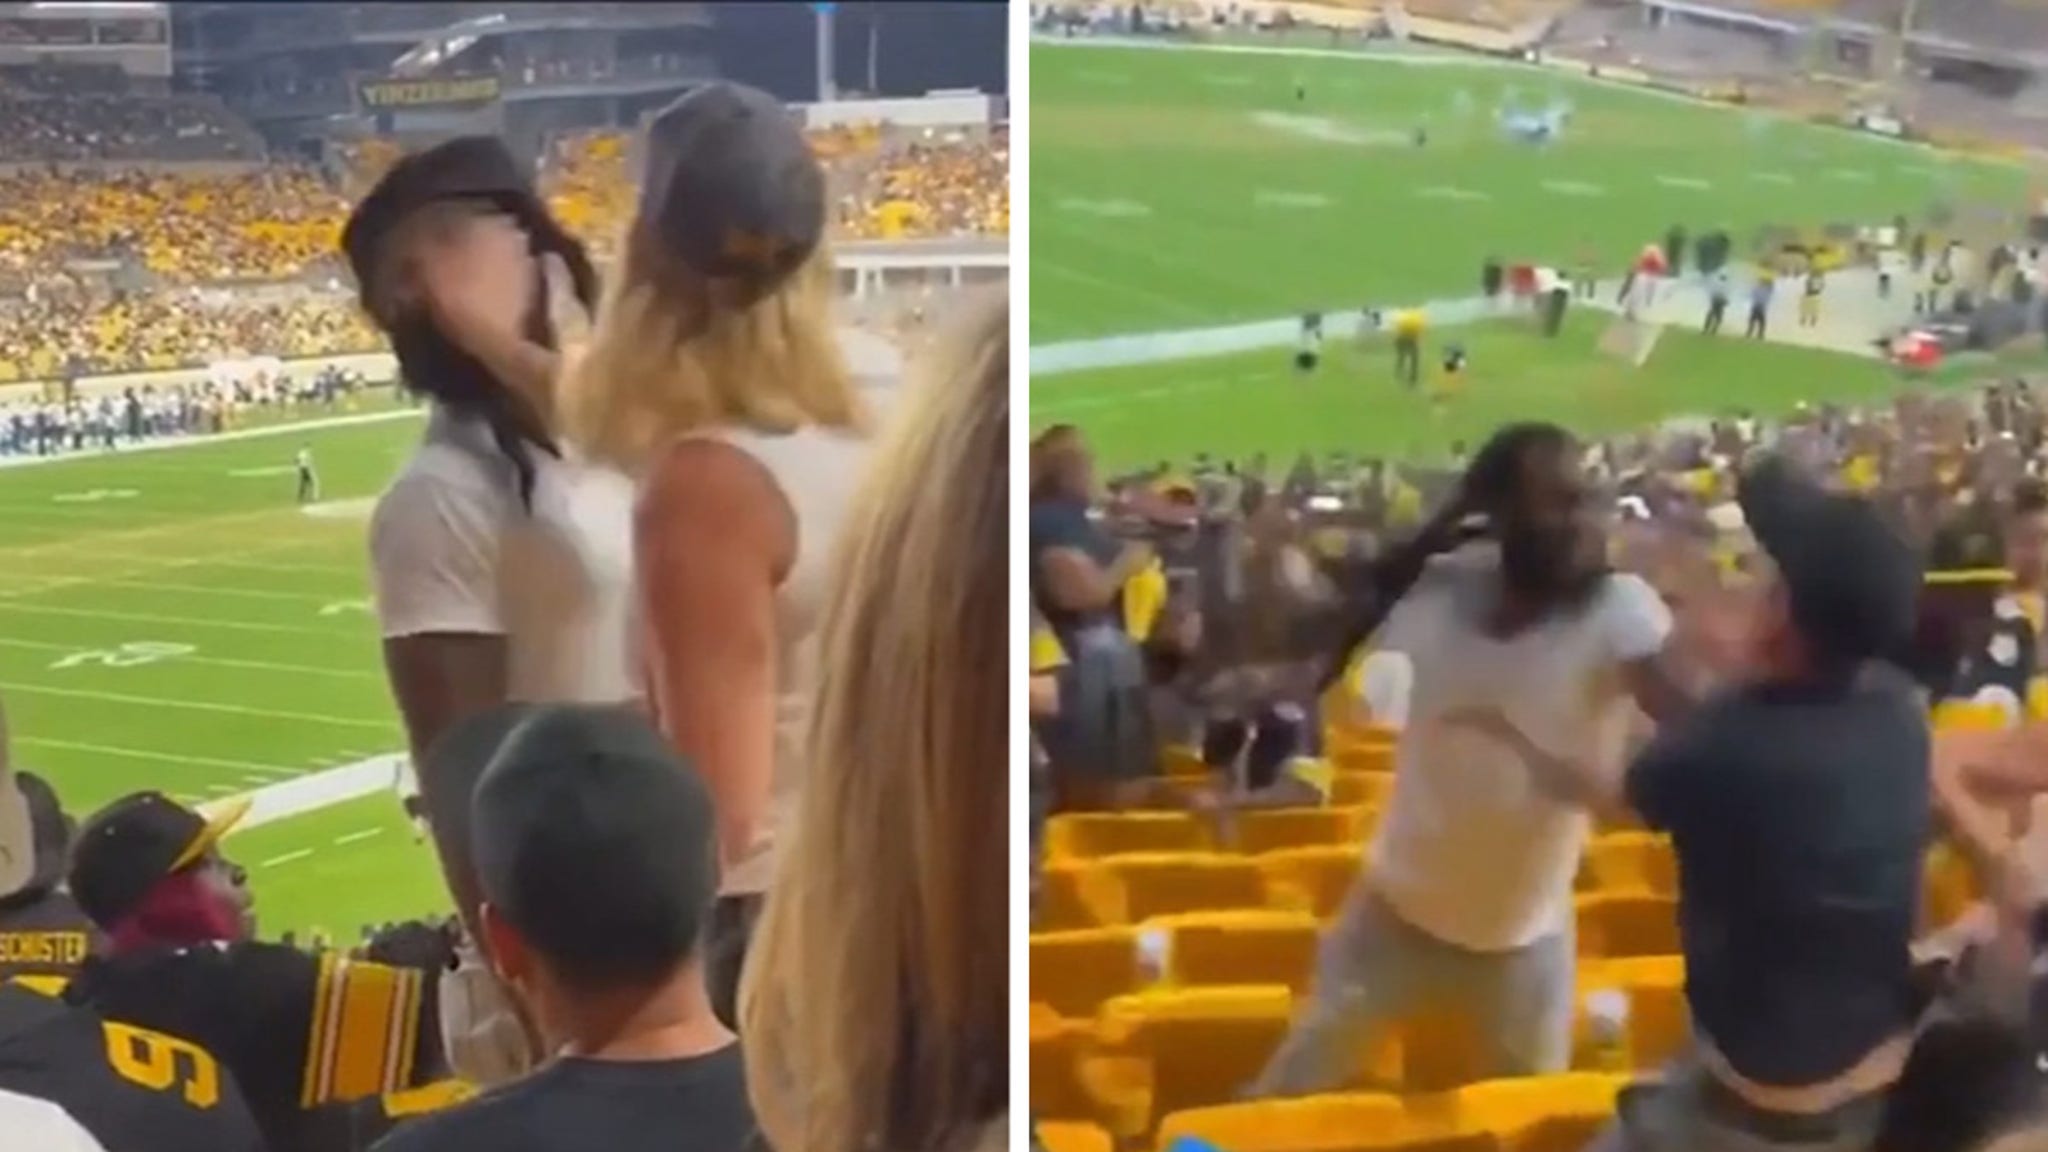 Woman Slaps Man in Face, Fight Erupts at Steelers Game